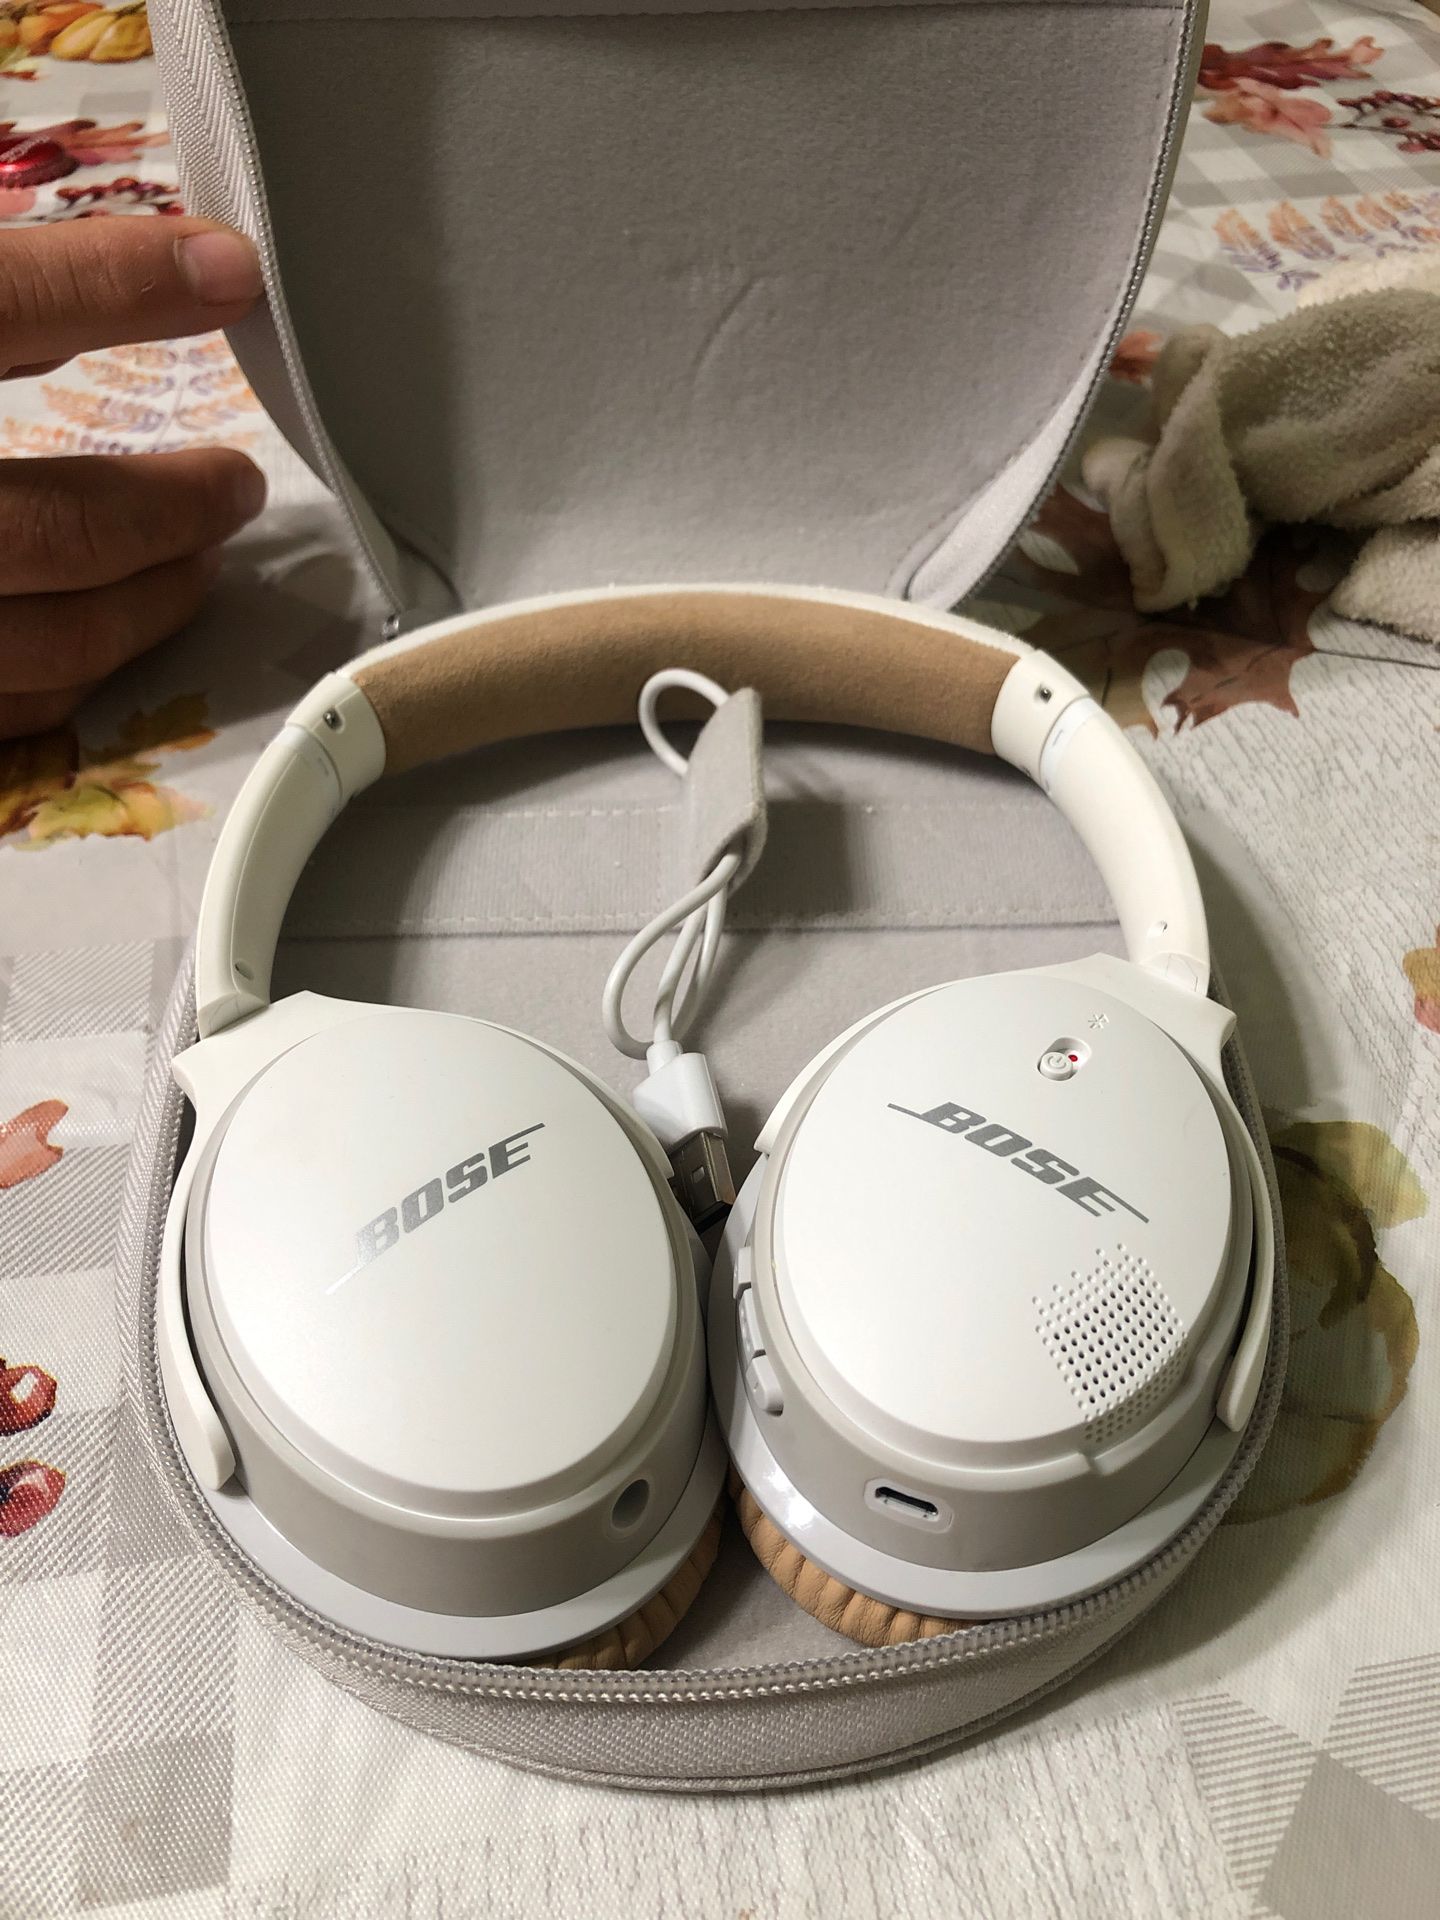 BOSE SOUNDLNK BQ35ii IN GOOD CONDITION AND GREAT SOUND